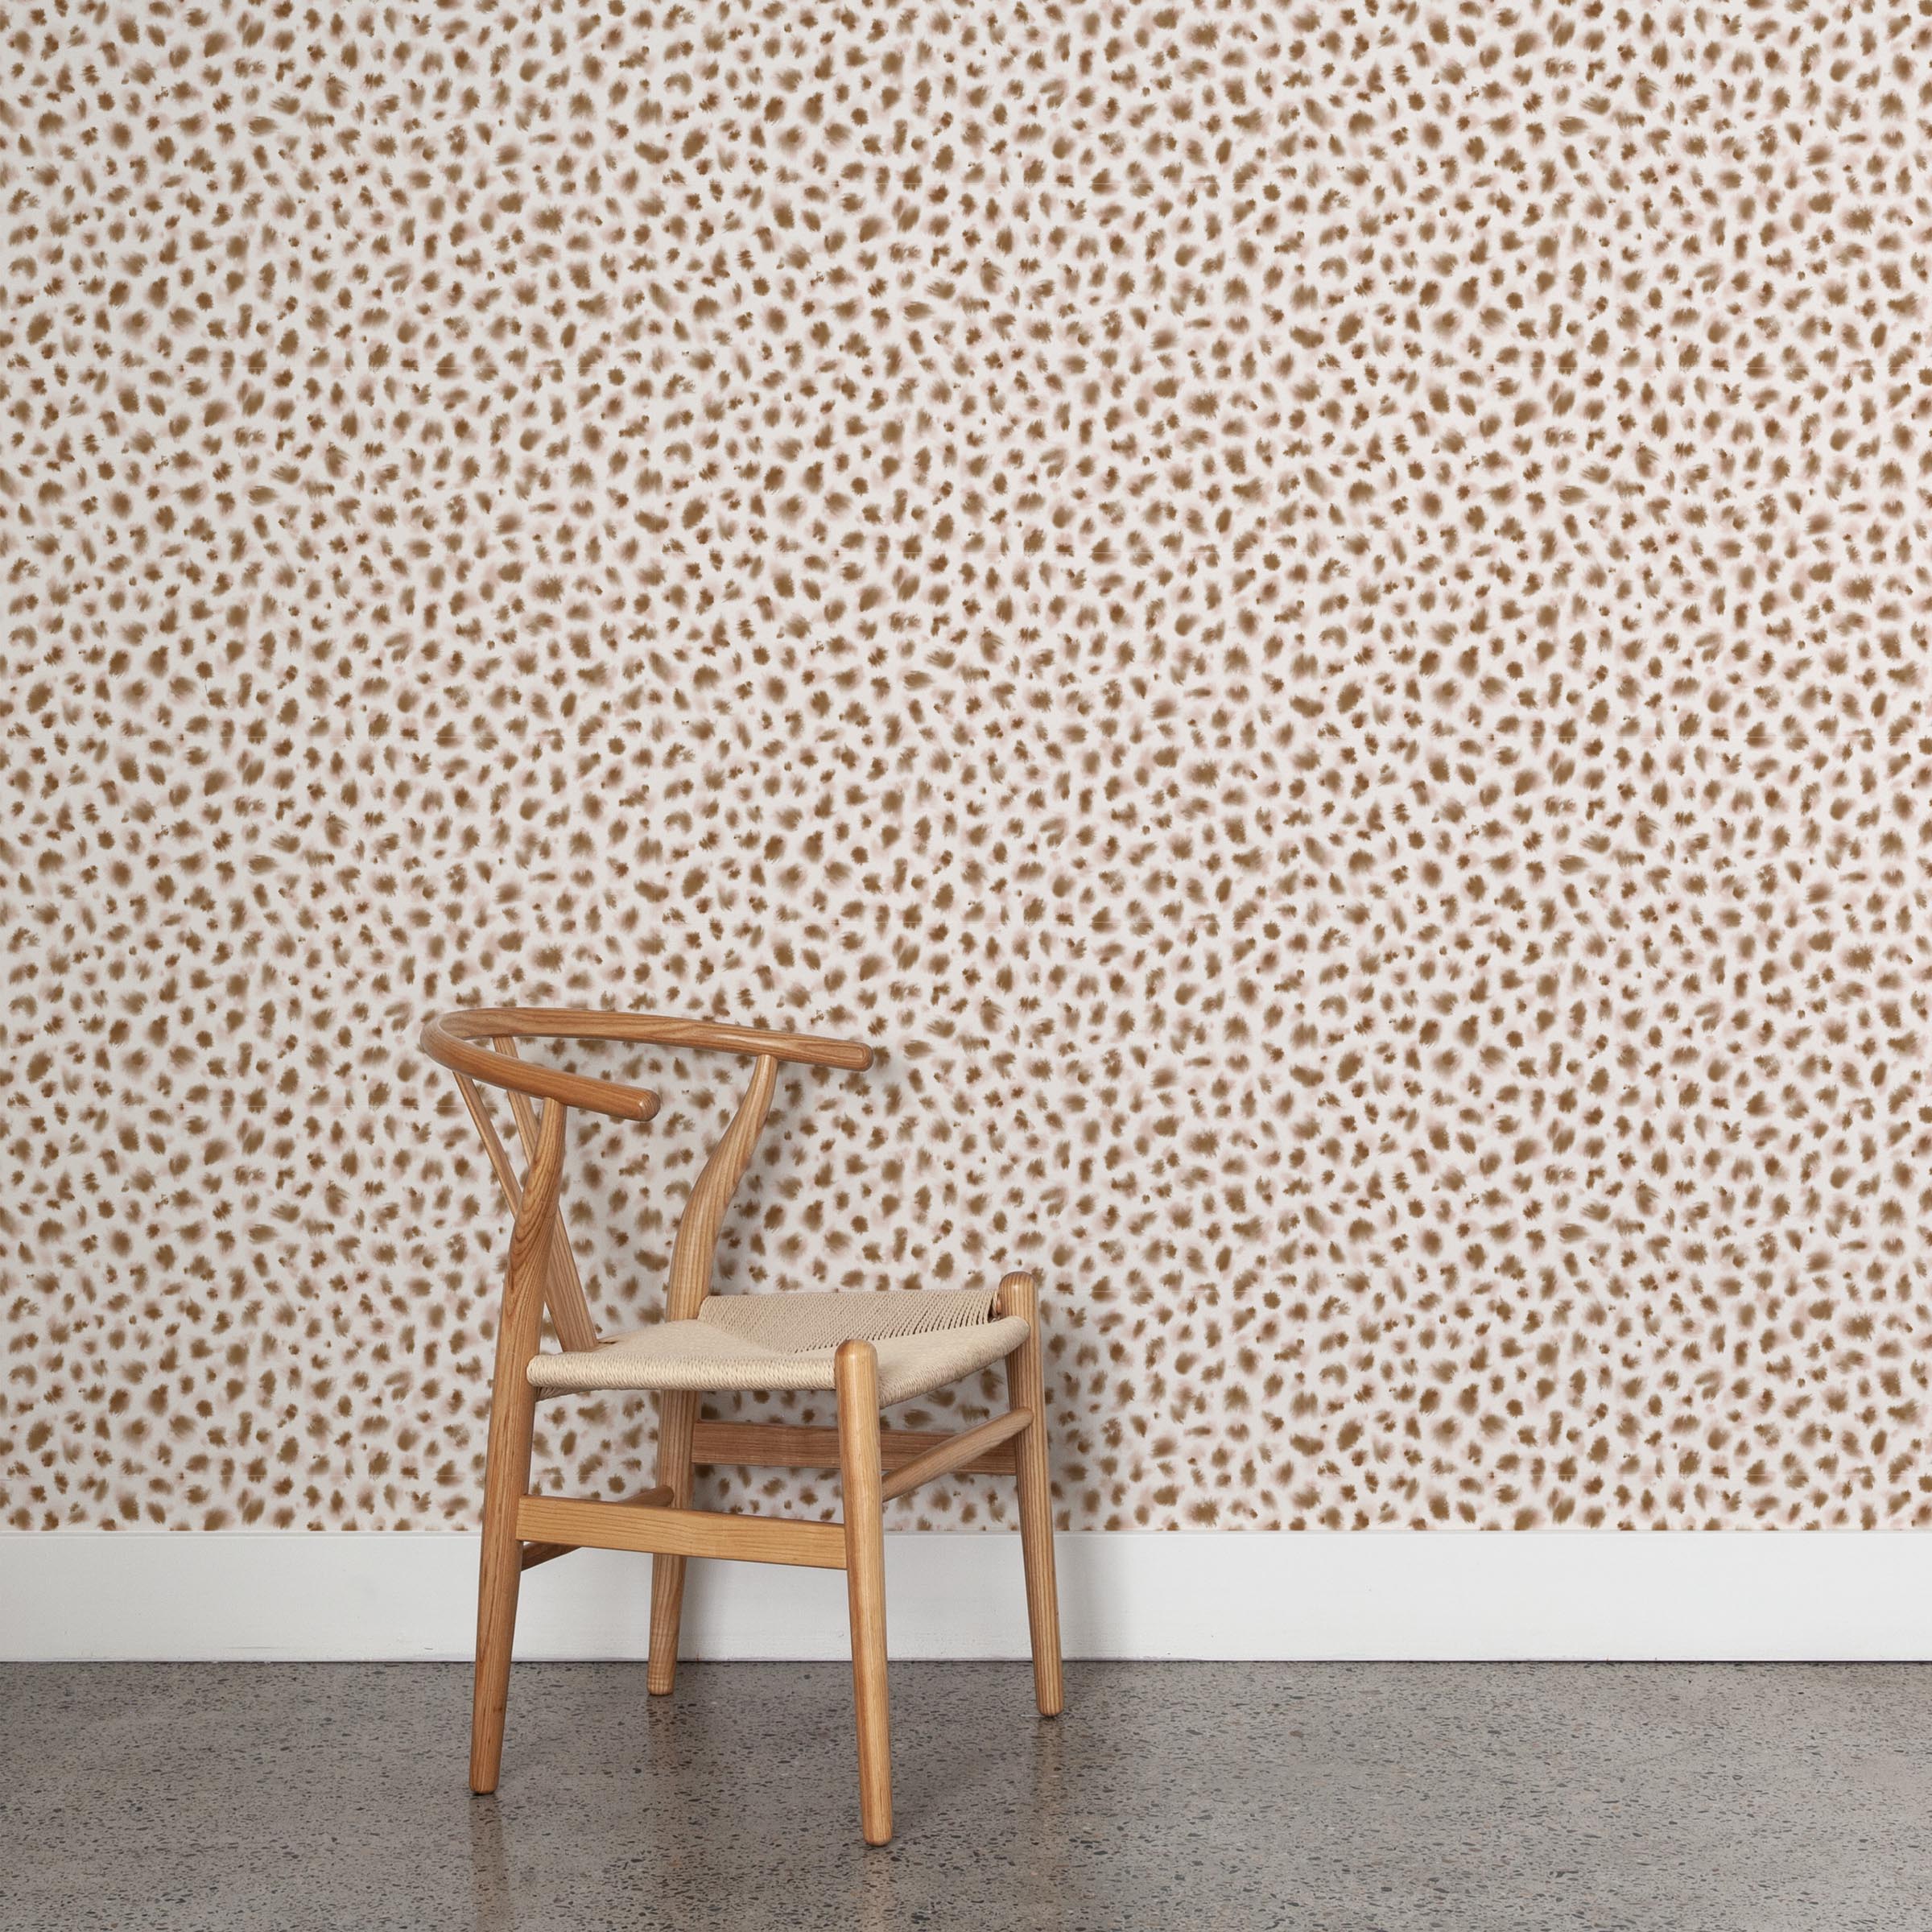 A wooden chair stands in front of a wall papered in a painterly animal print in cream and brown on a white field.